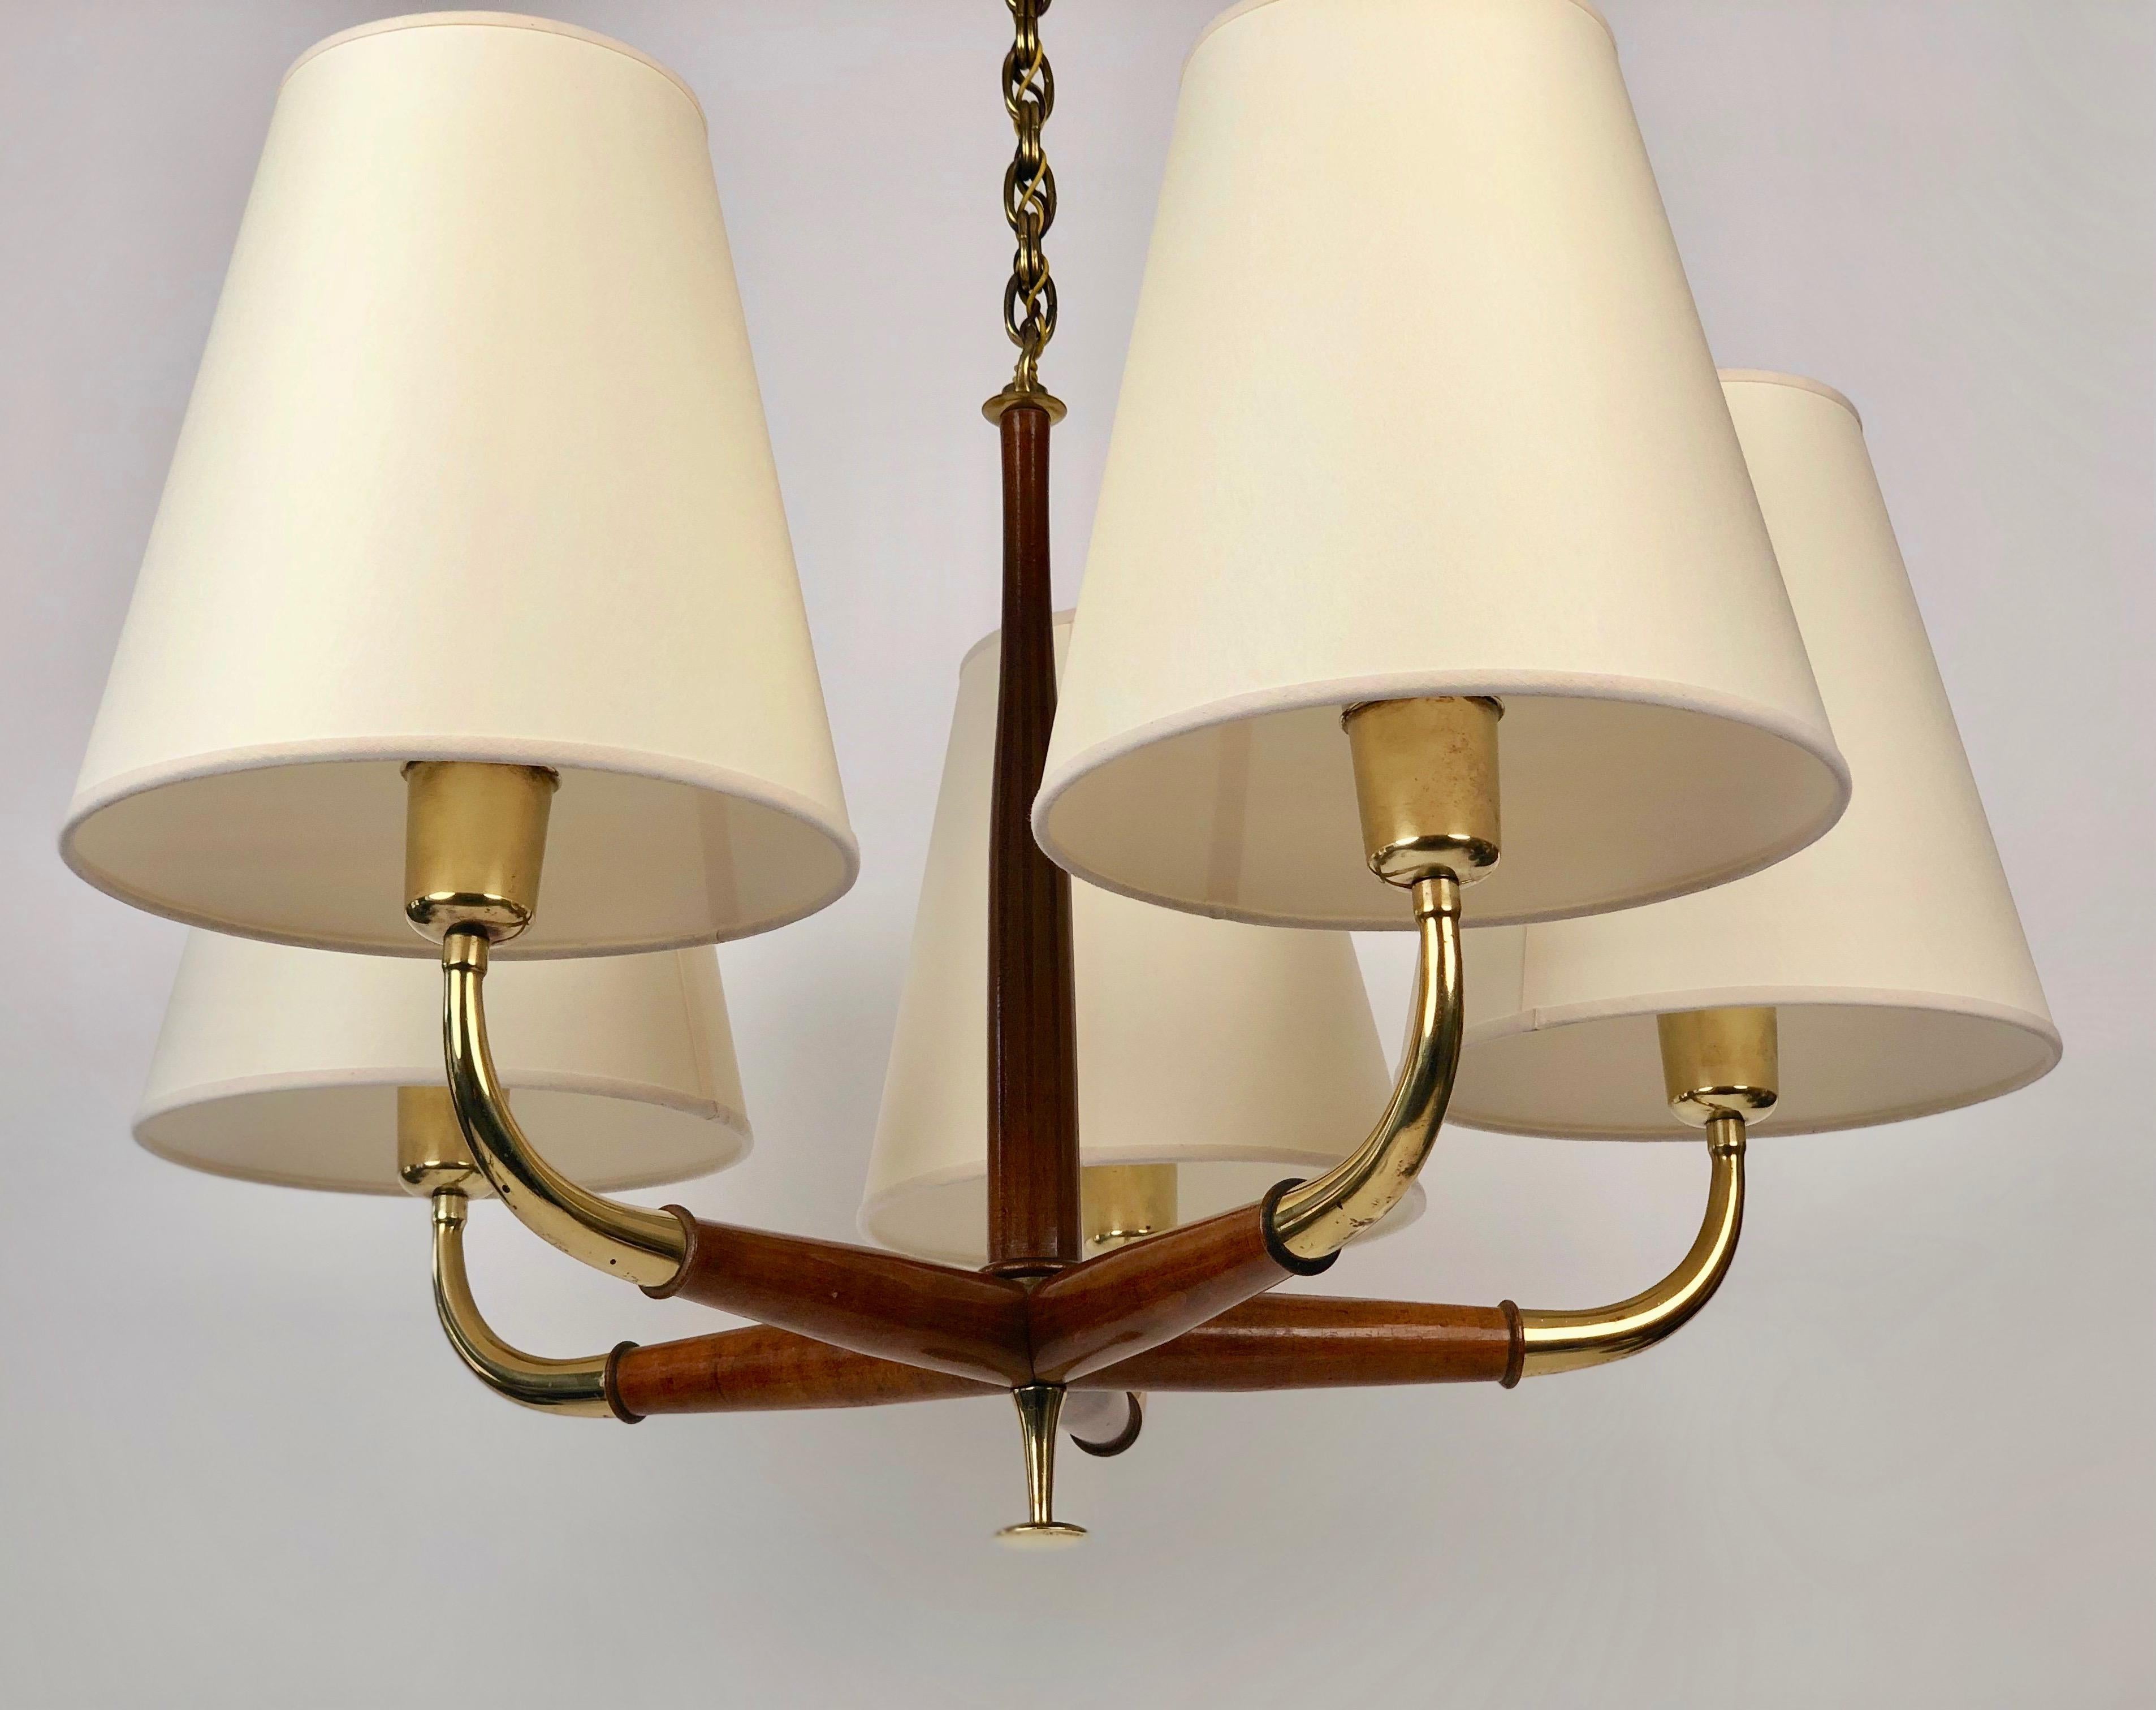 A beautiful five arm pendant lamp from Josef Frank in brass and walnut.
The wood and brass elements exhibit a lovely patina giving the lamp a visual warmth.

The lamp shades are new, made from paper, based on the original shades.

The electric has